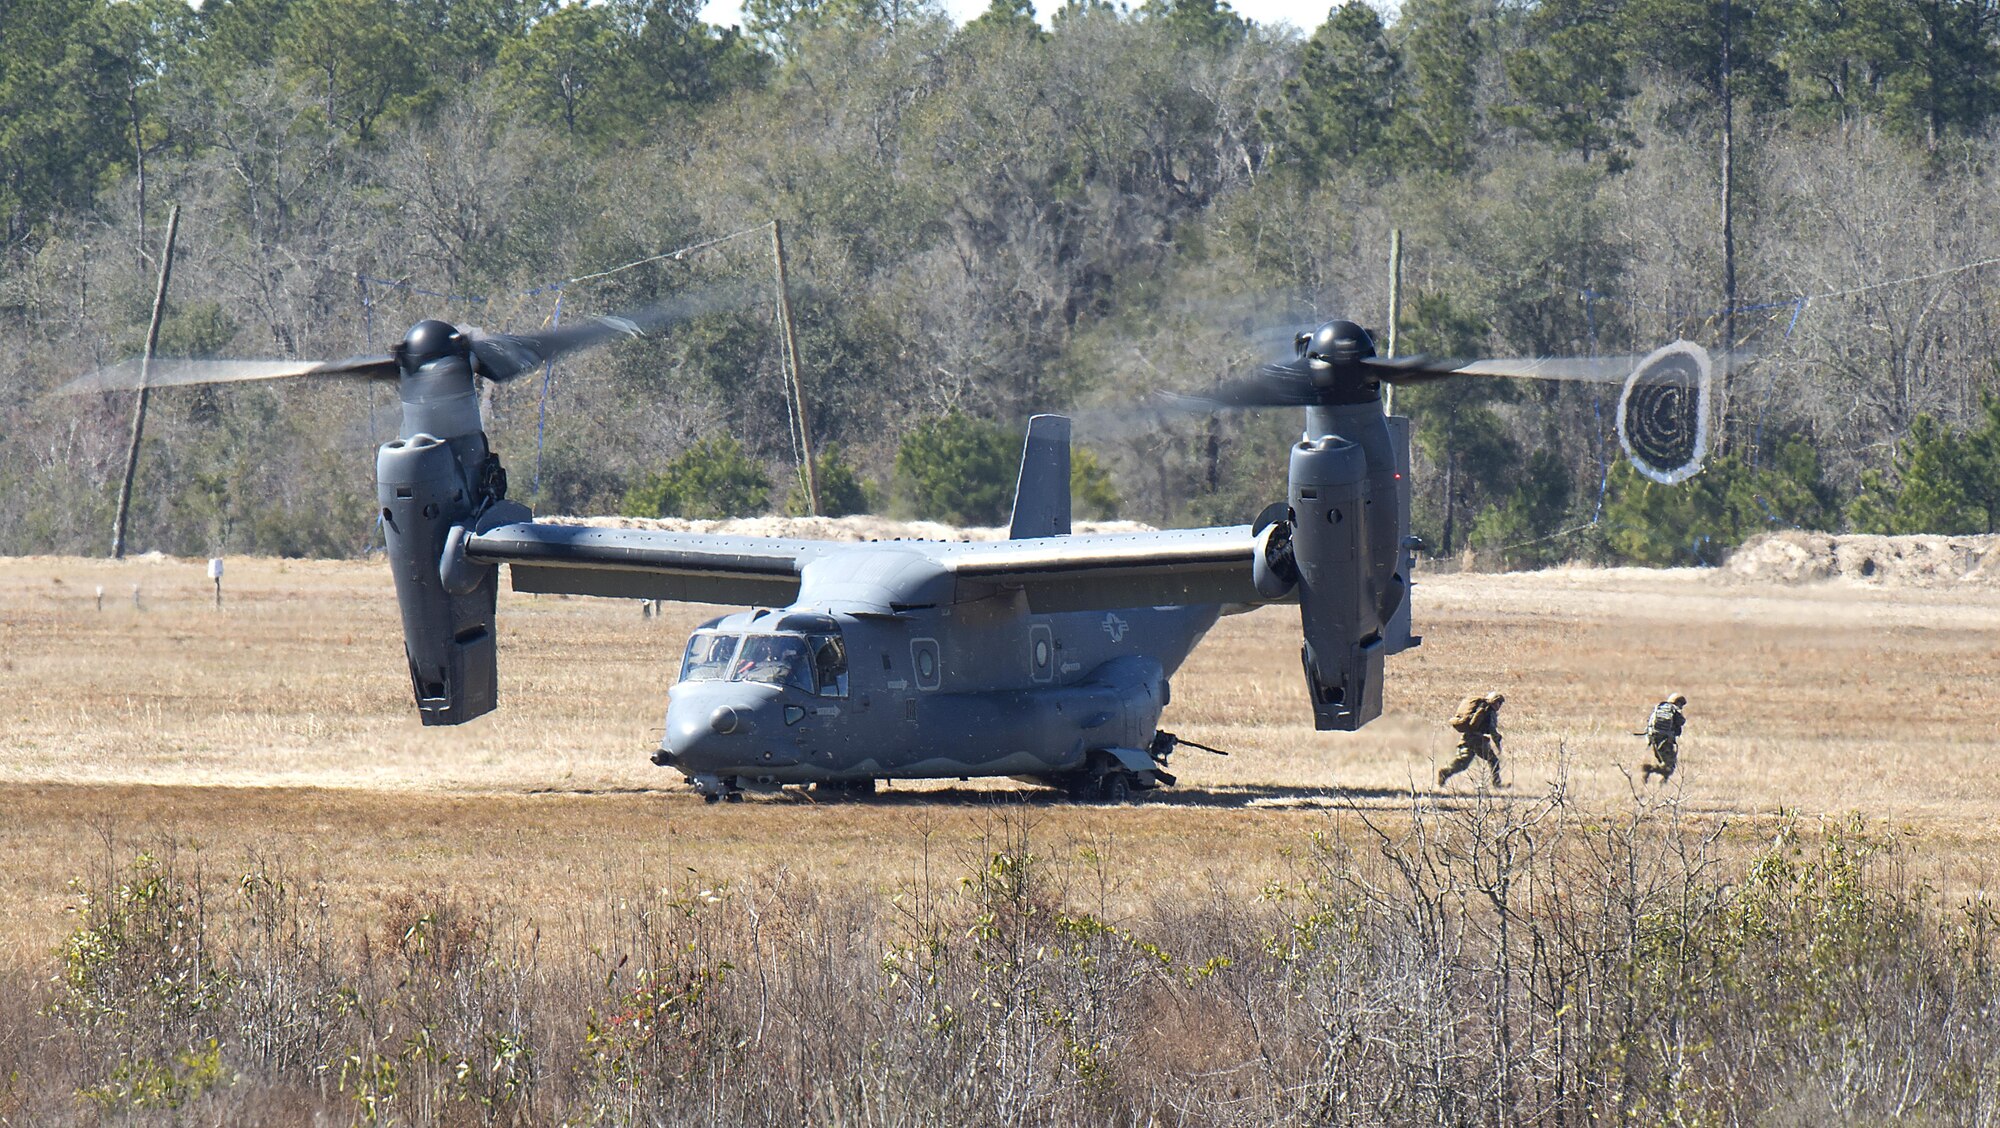 A CV-22 Osprey deploys a tactical air control party onto the ground of Grand Bay Bombing and Gunnery Range at Moody Air Force Base, Ga., Feb. 18, 2016. Multiple U.S. Air Force aircraft within Air Combat Command conducted joint combat rescue and aerial training that showcased the aircrafts tactical air and ground maneuvers, as well as its weapons capabilities. (U.S. Air Force photo by Staff Sgt. Brian J. Valencia/Released)